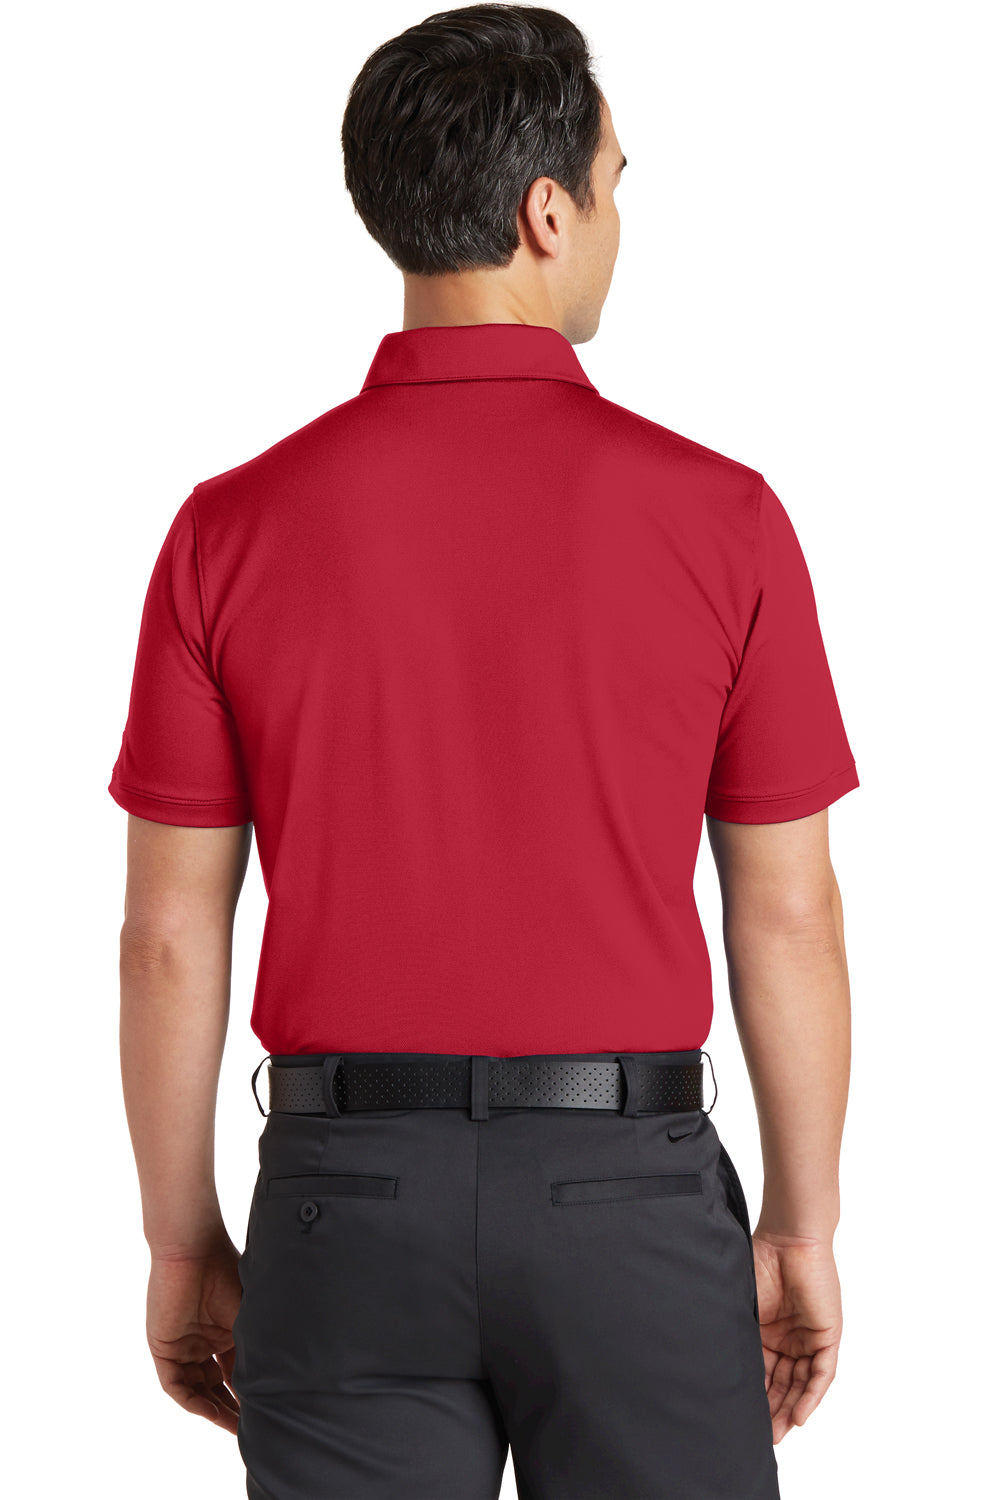 Nike 746099 Mens Icon Dri-Fit Moisture Wicking Short Sleeve Polo Shirt Gym Red Model Back